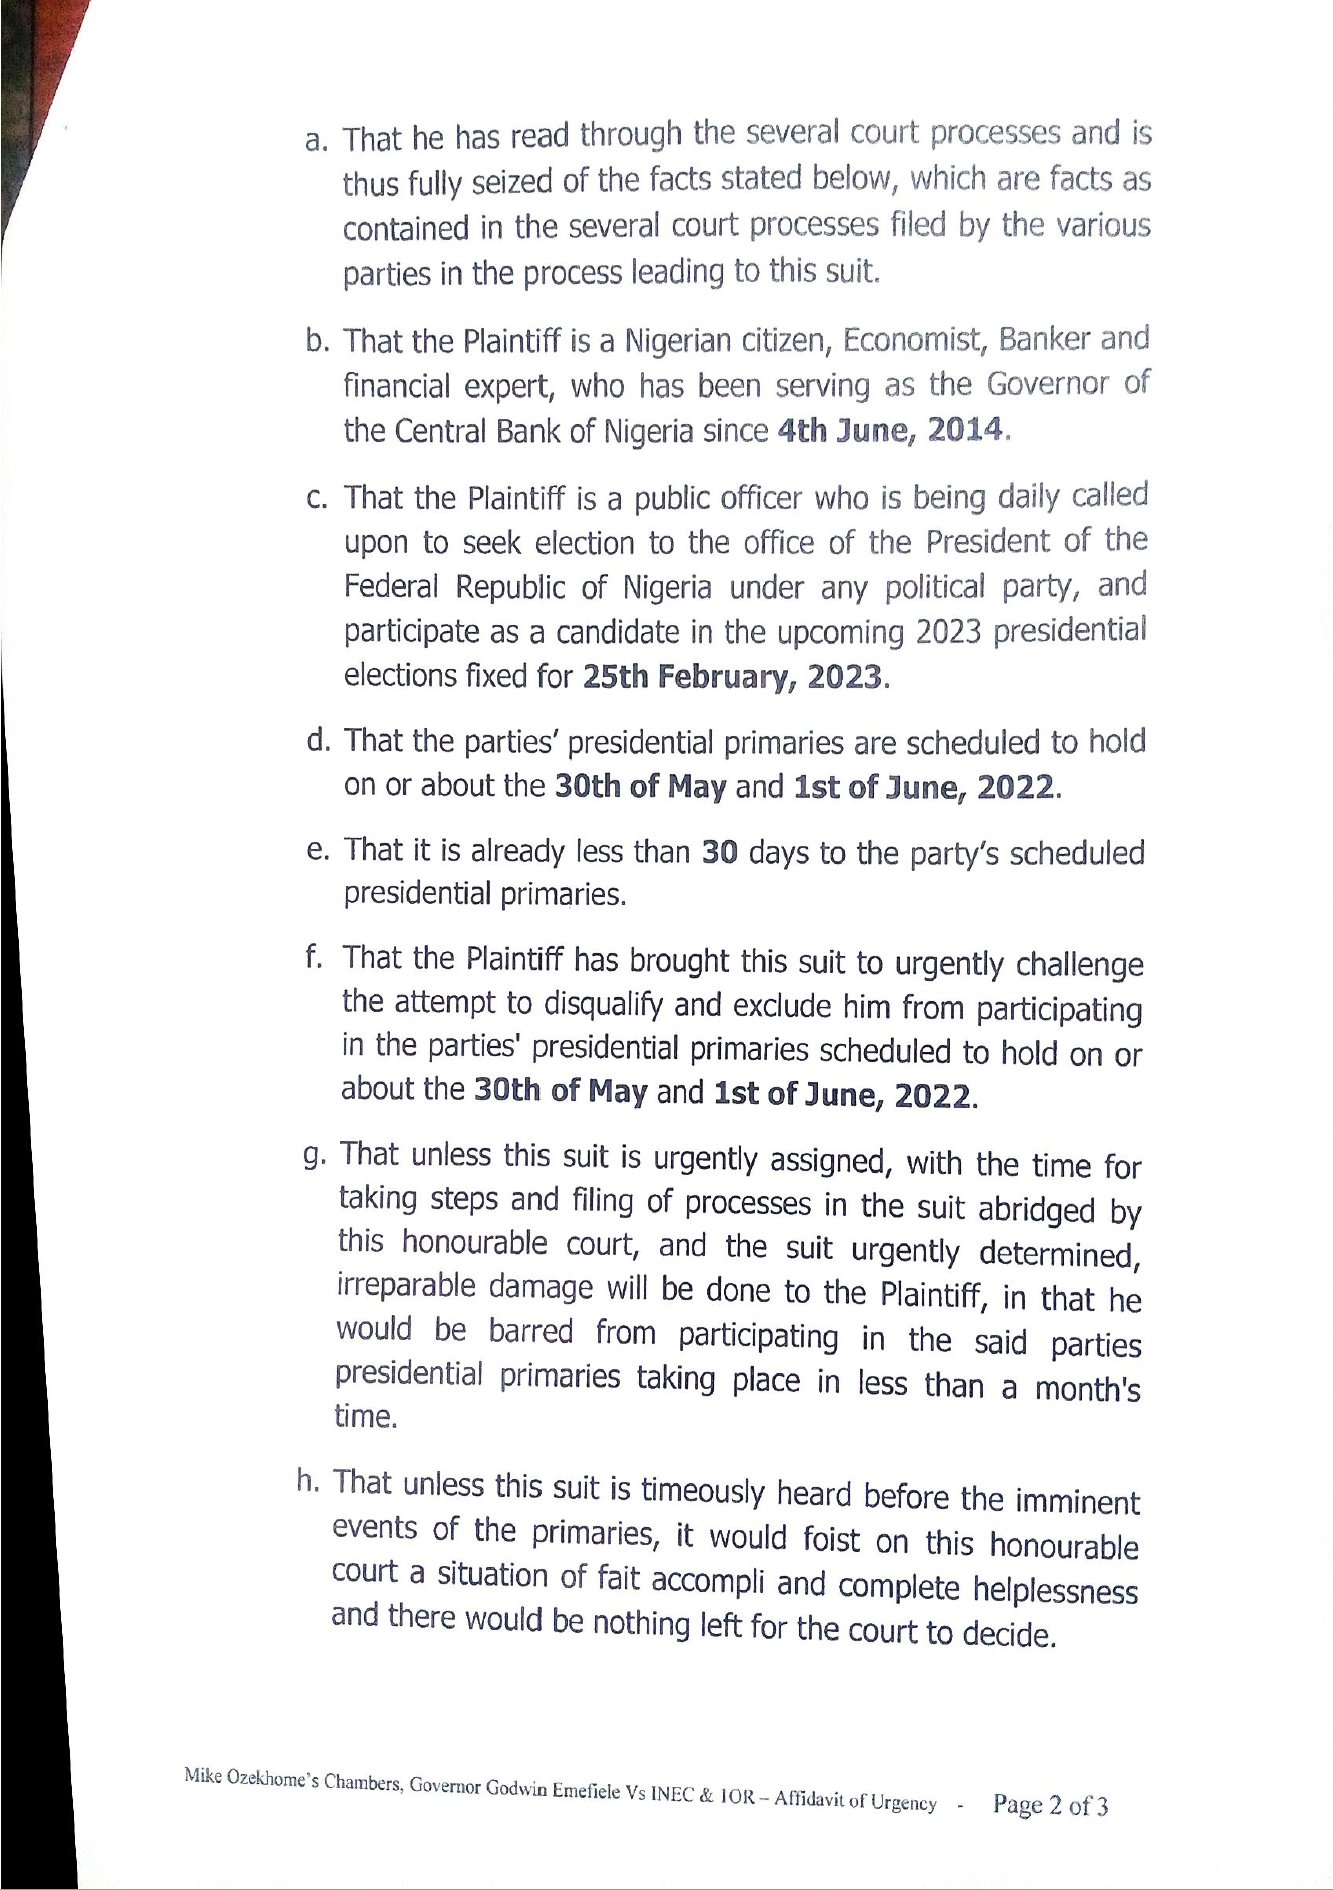 2023: Irreparable damage will be done to me if I'm not allowed to run - Emefiele tells court